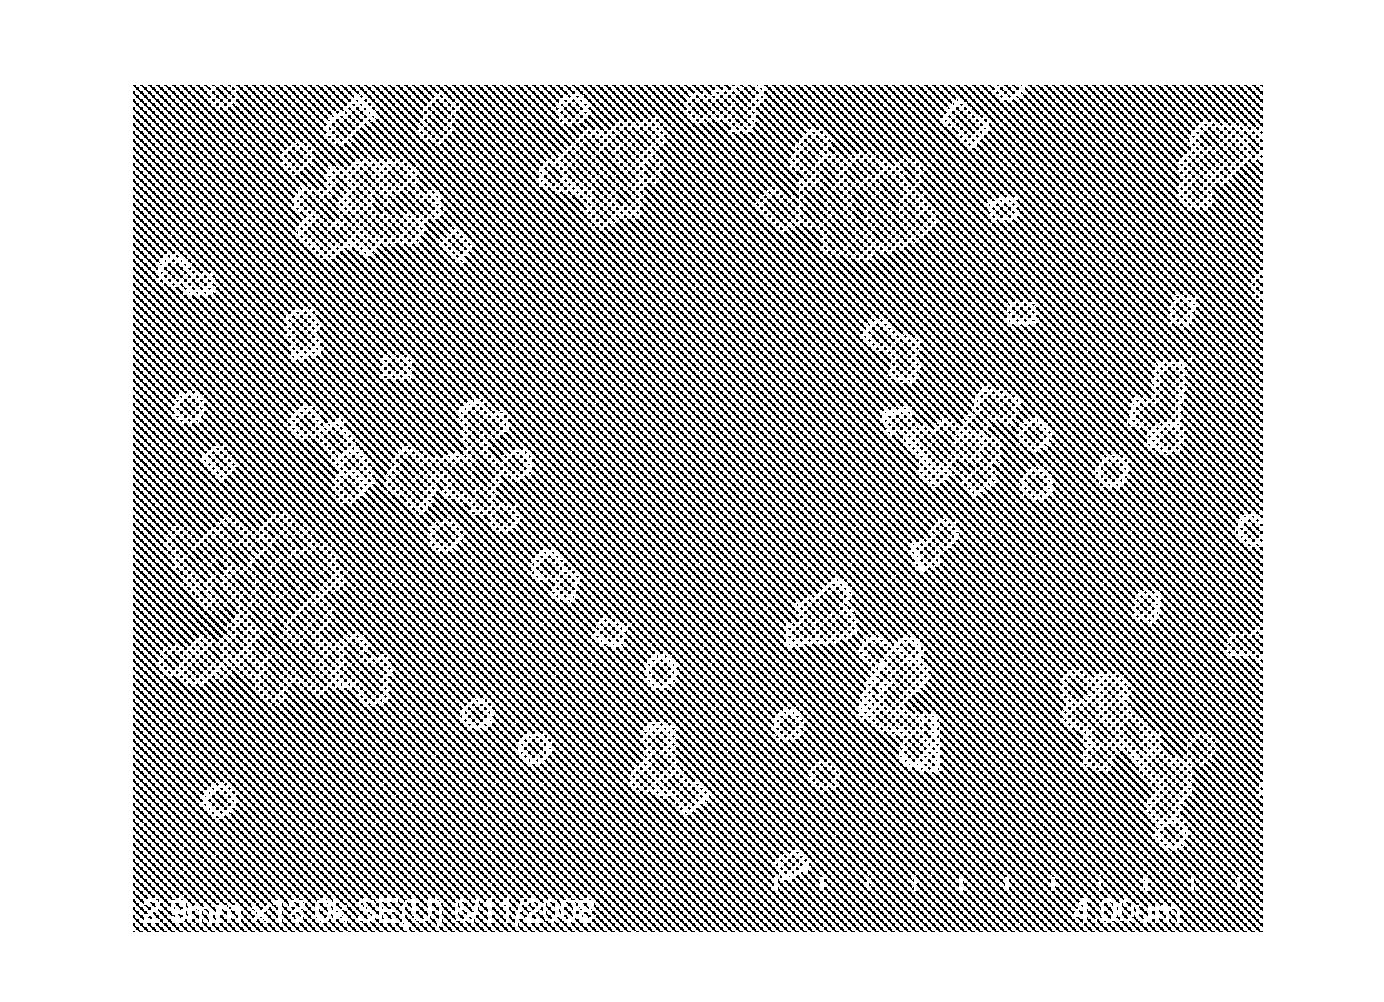 Degradable compounds and methods of use thereof, particularly with particle replication in non-wetting templates